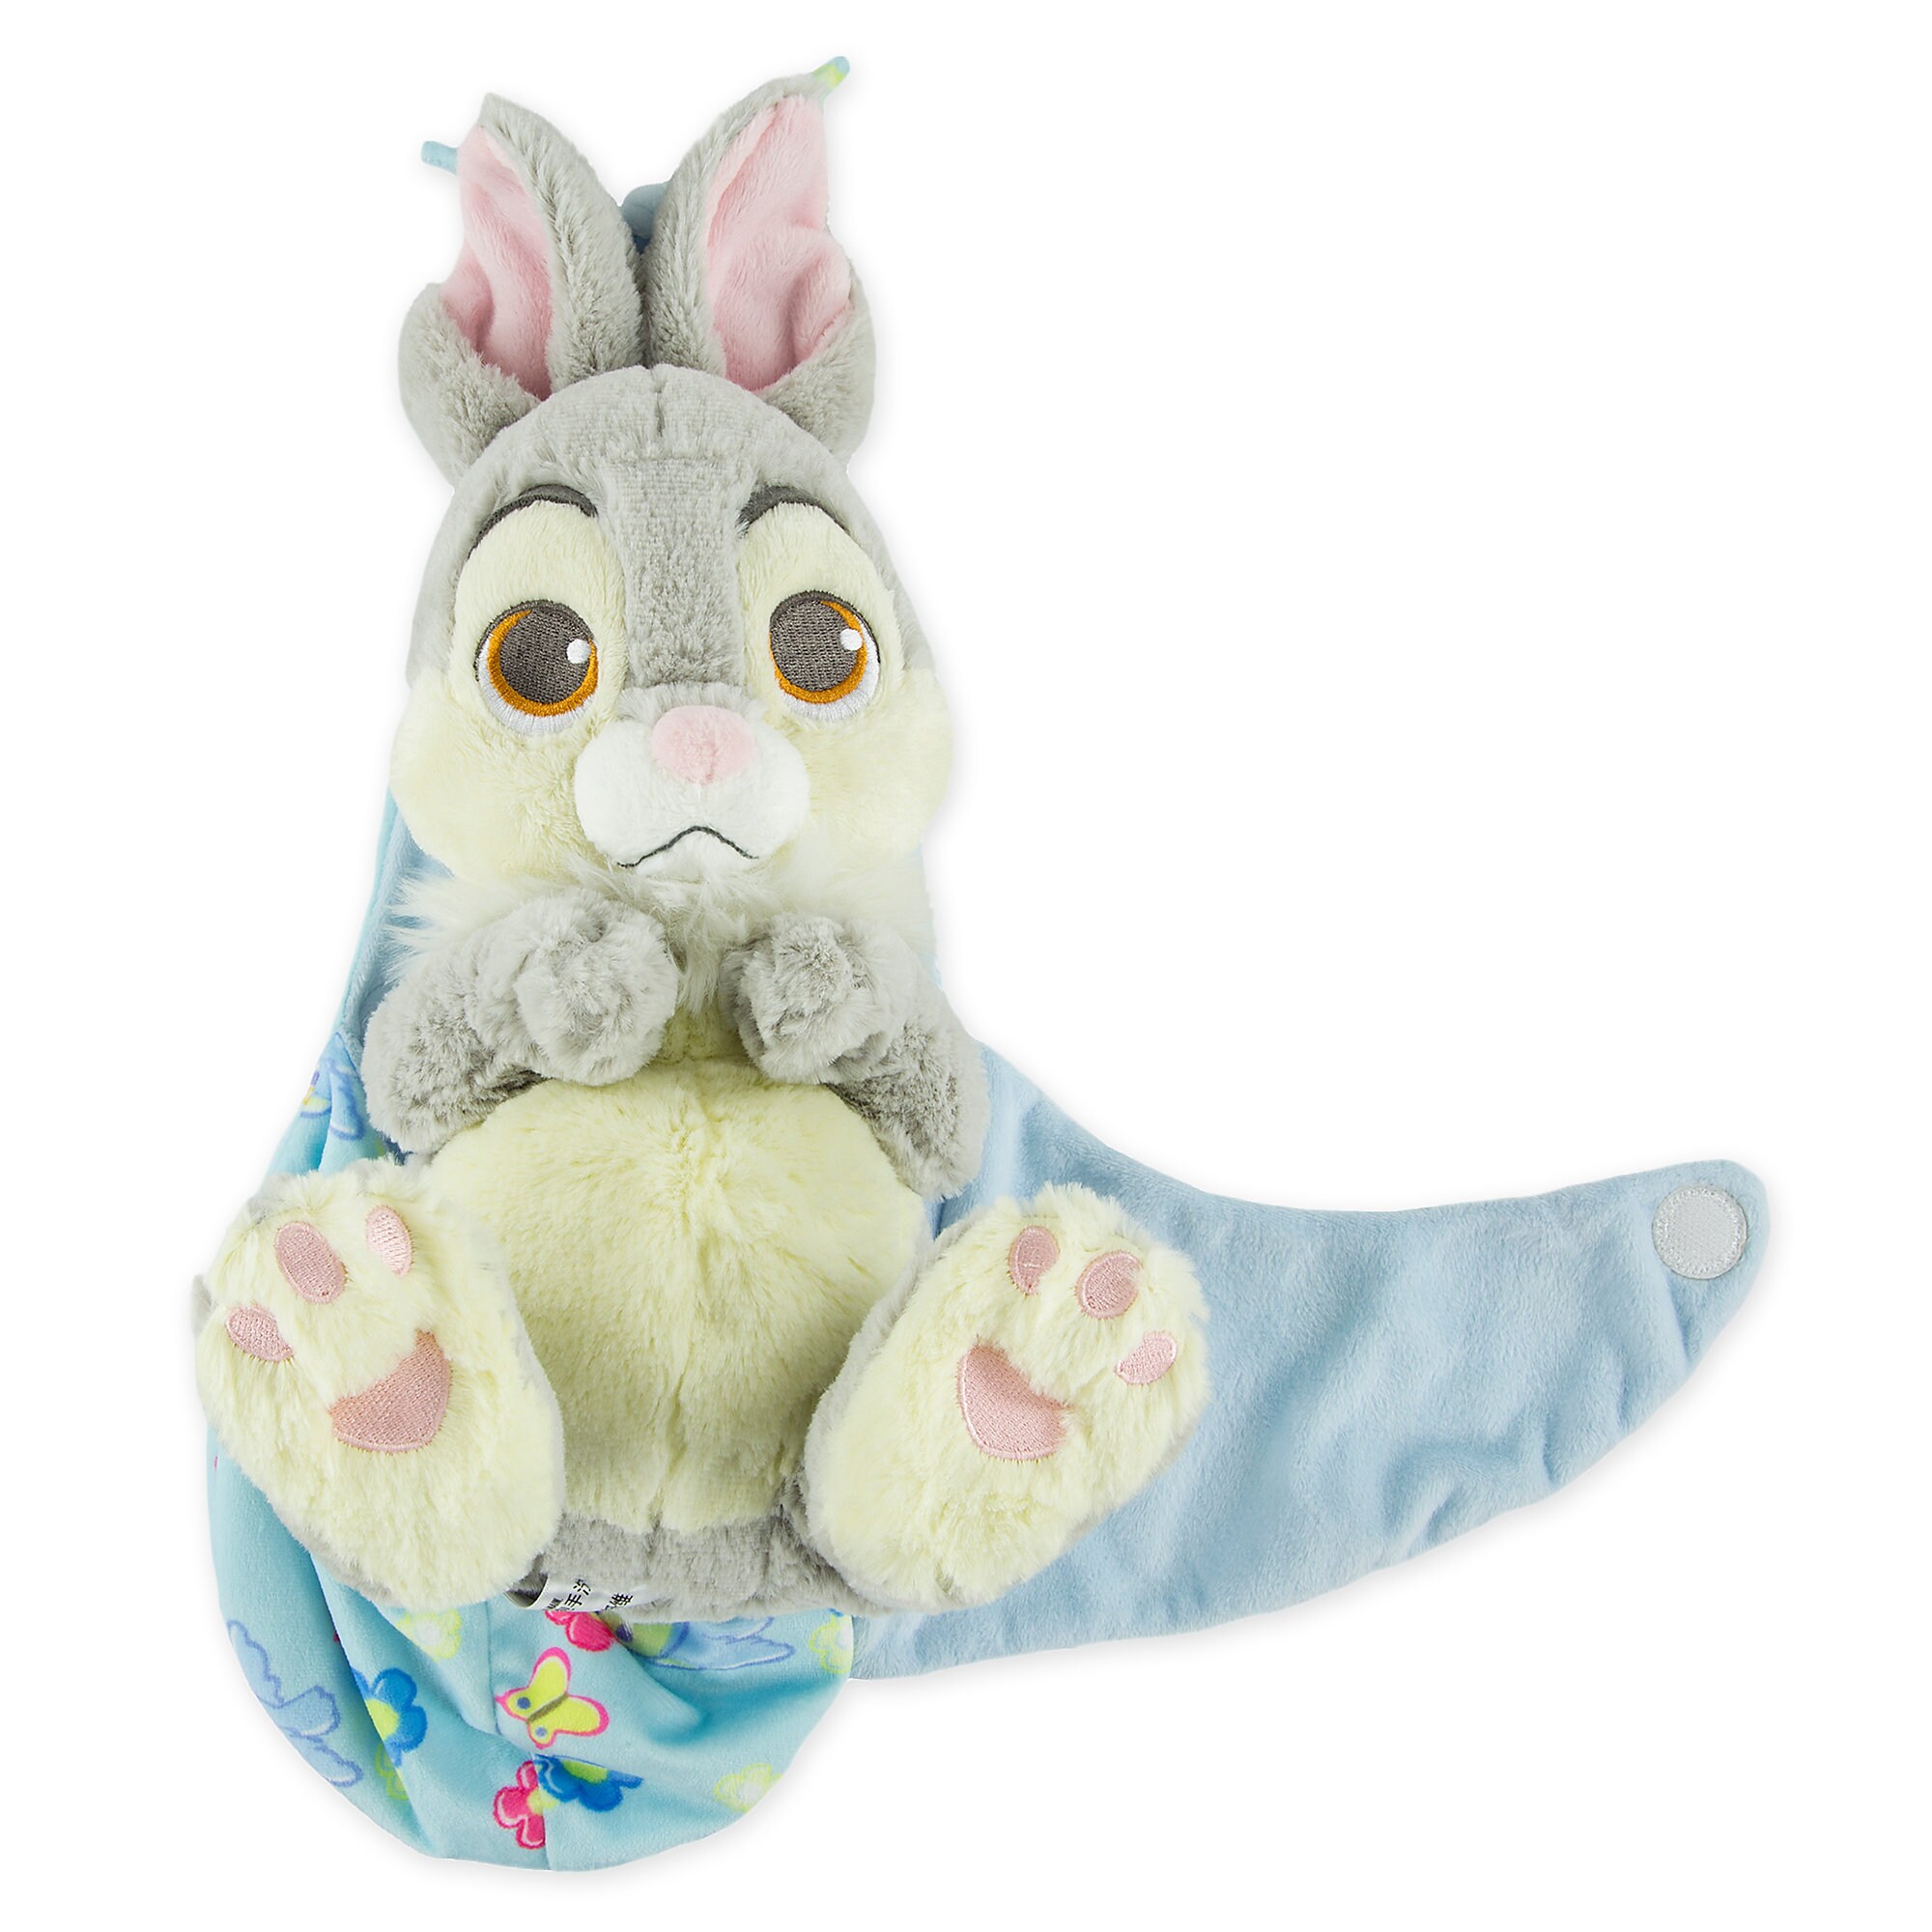 Thumper Plush with Blanket Pouch - Disney's Babies - Small